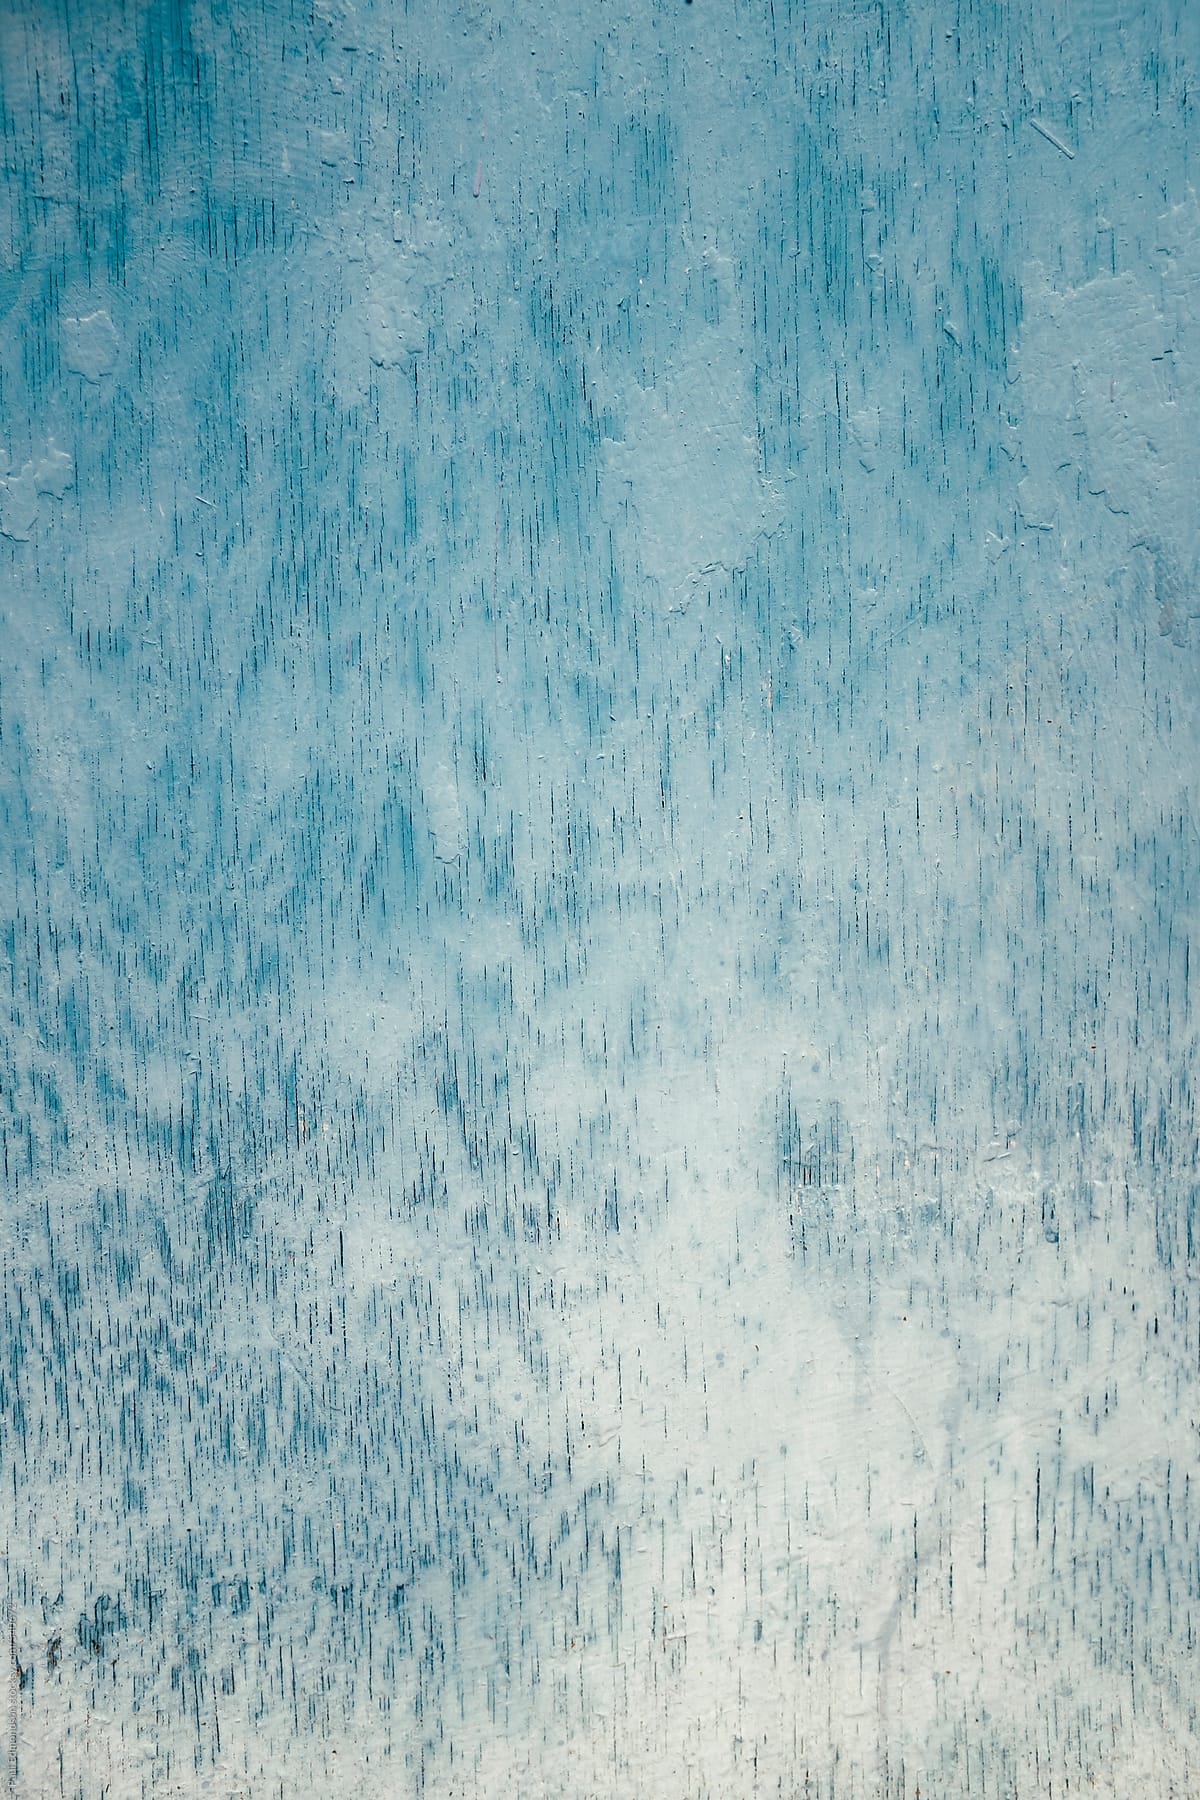 Close up of blue and turquoise paint covering graffiti on plywood wall